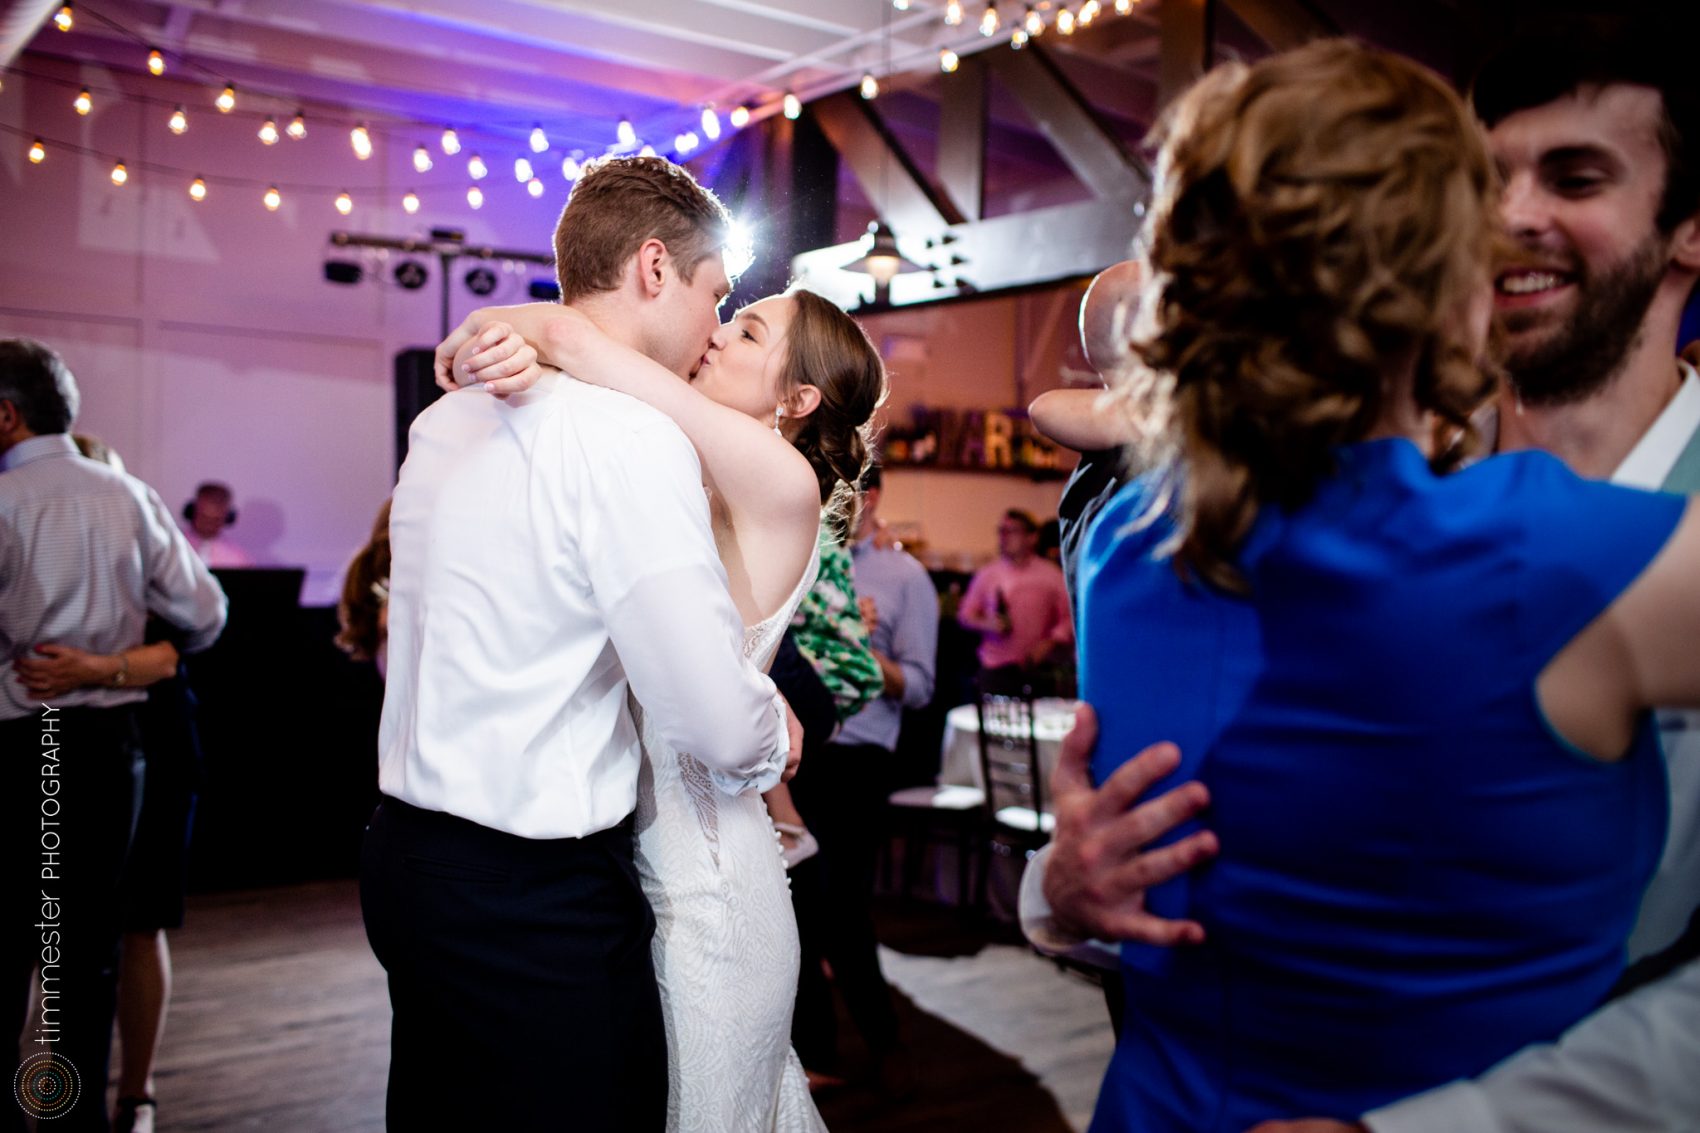 The wedding reception of bride and groom, Sarah & Jacob, at their Raleigh venue, Traine, in North Carolina.